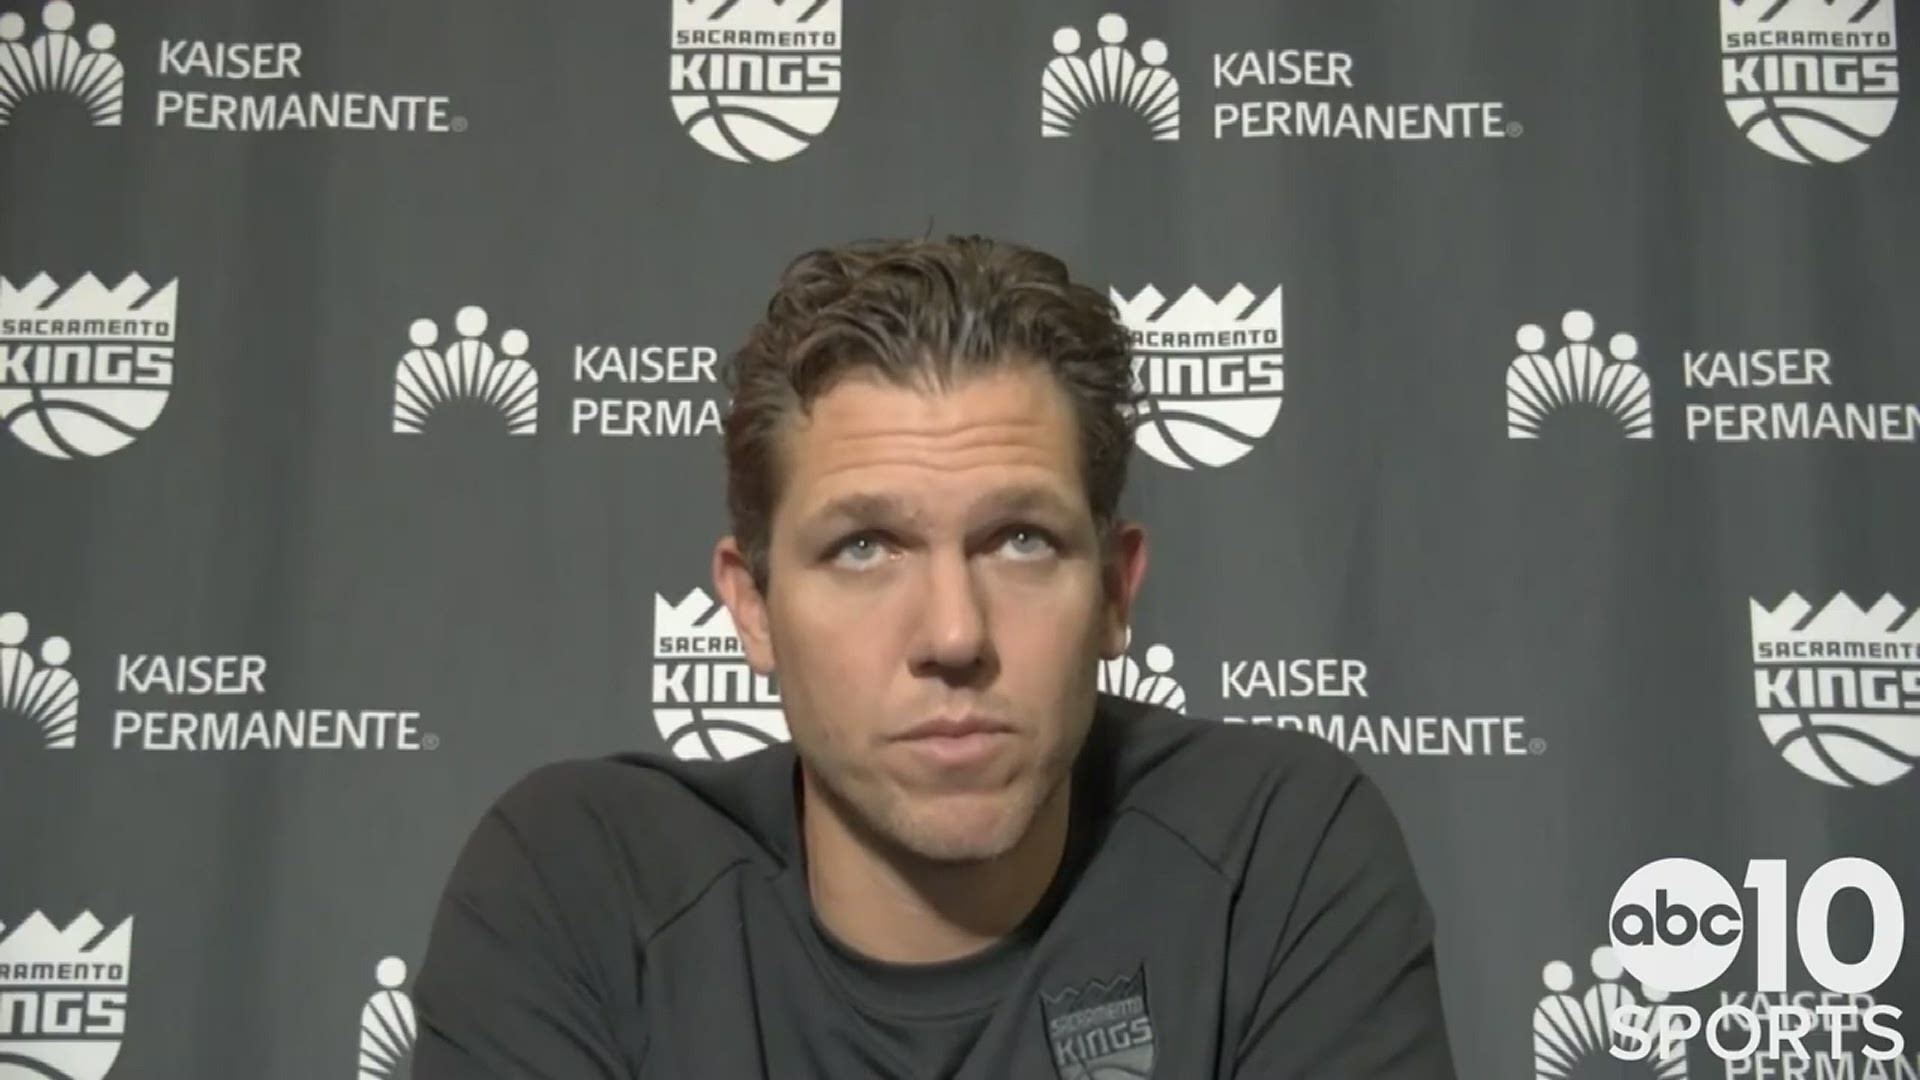 After a season finale loss to the Jazz on Sunday, Kings coach Luke Walton on the season's highs and lows, and says he's optimistic about his future in Sacramento.